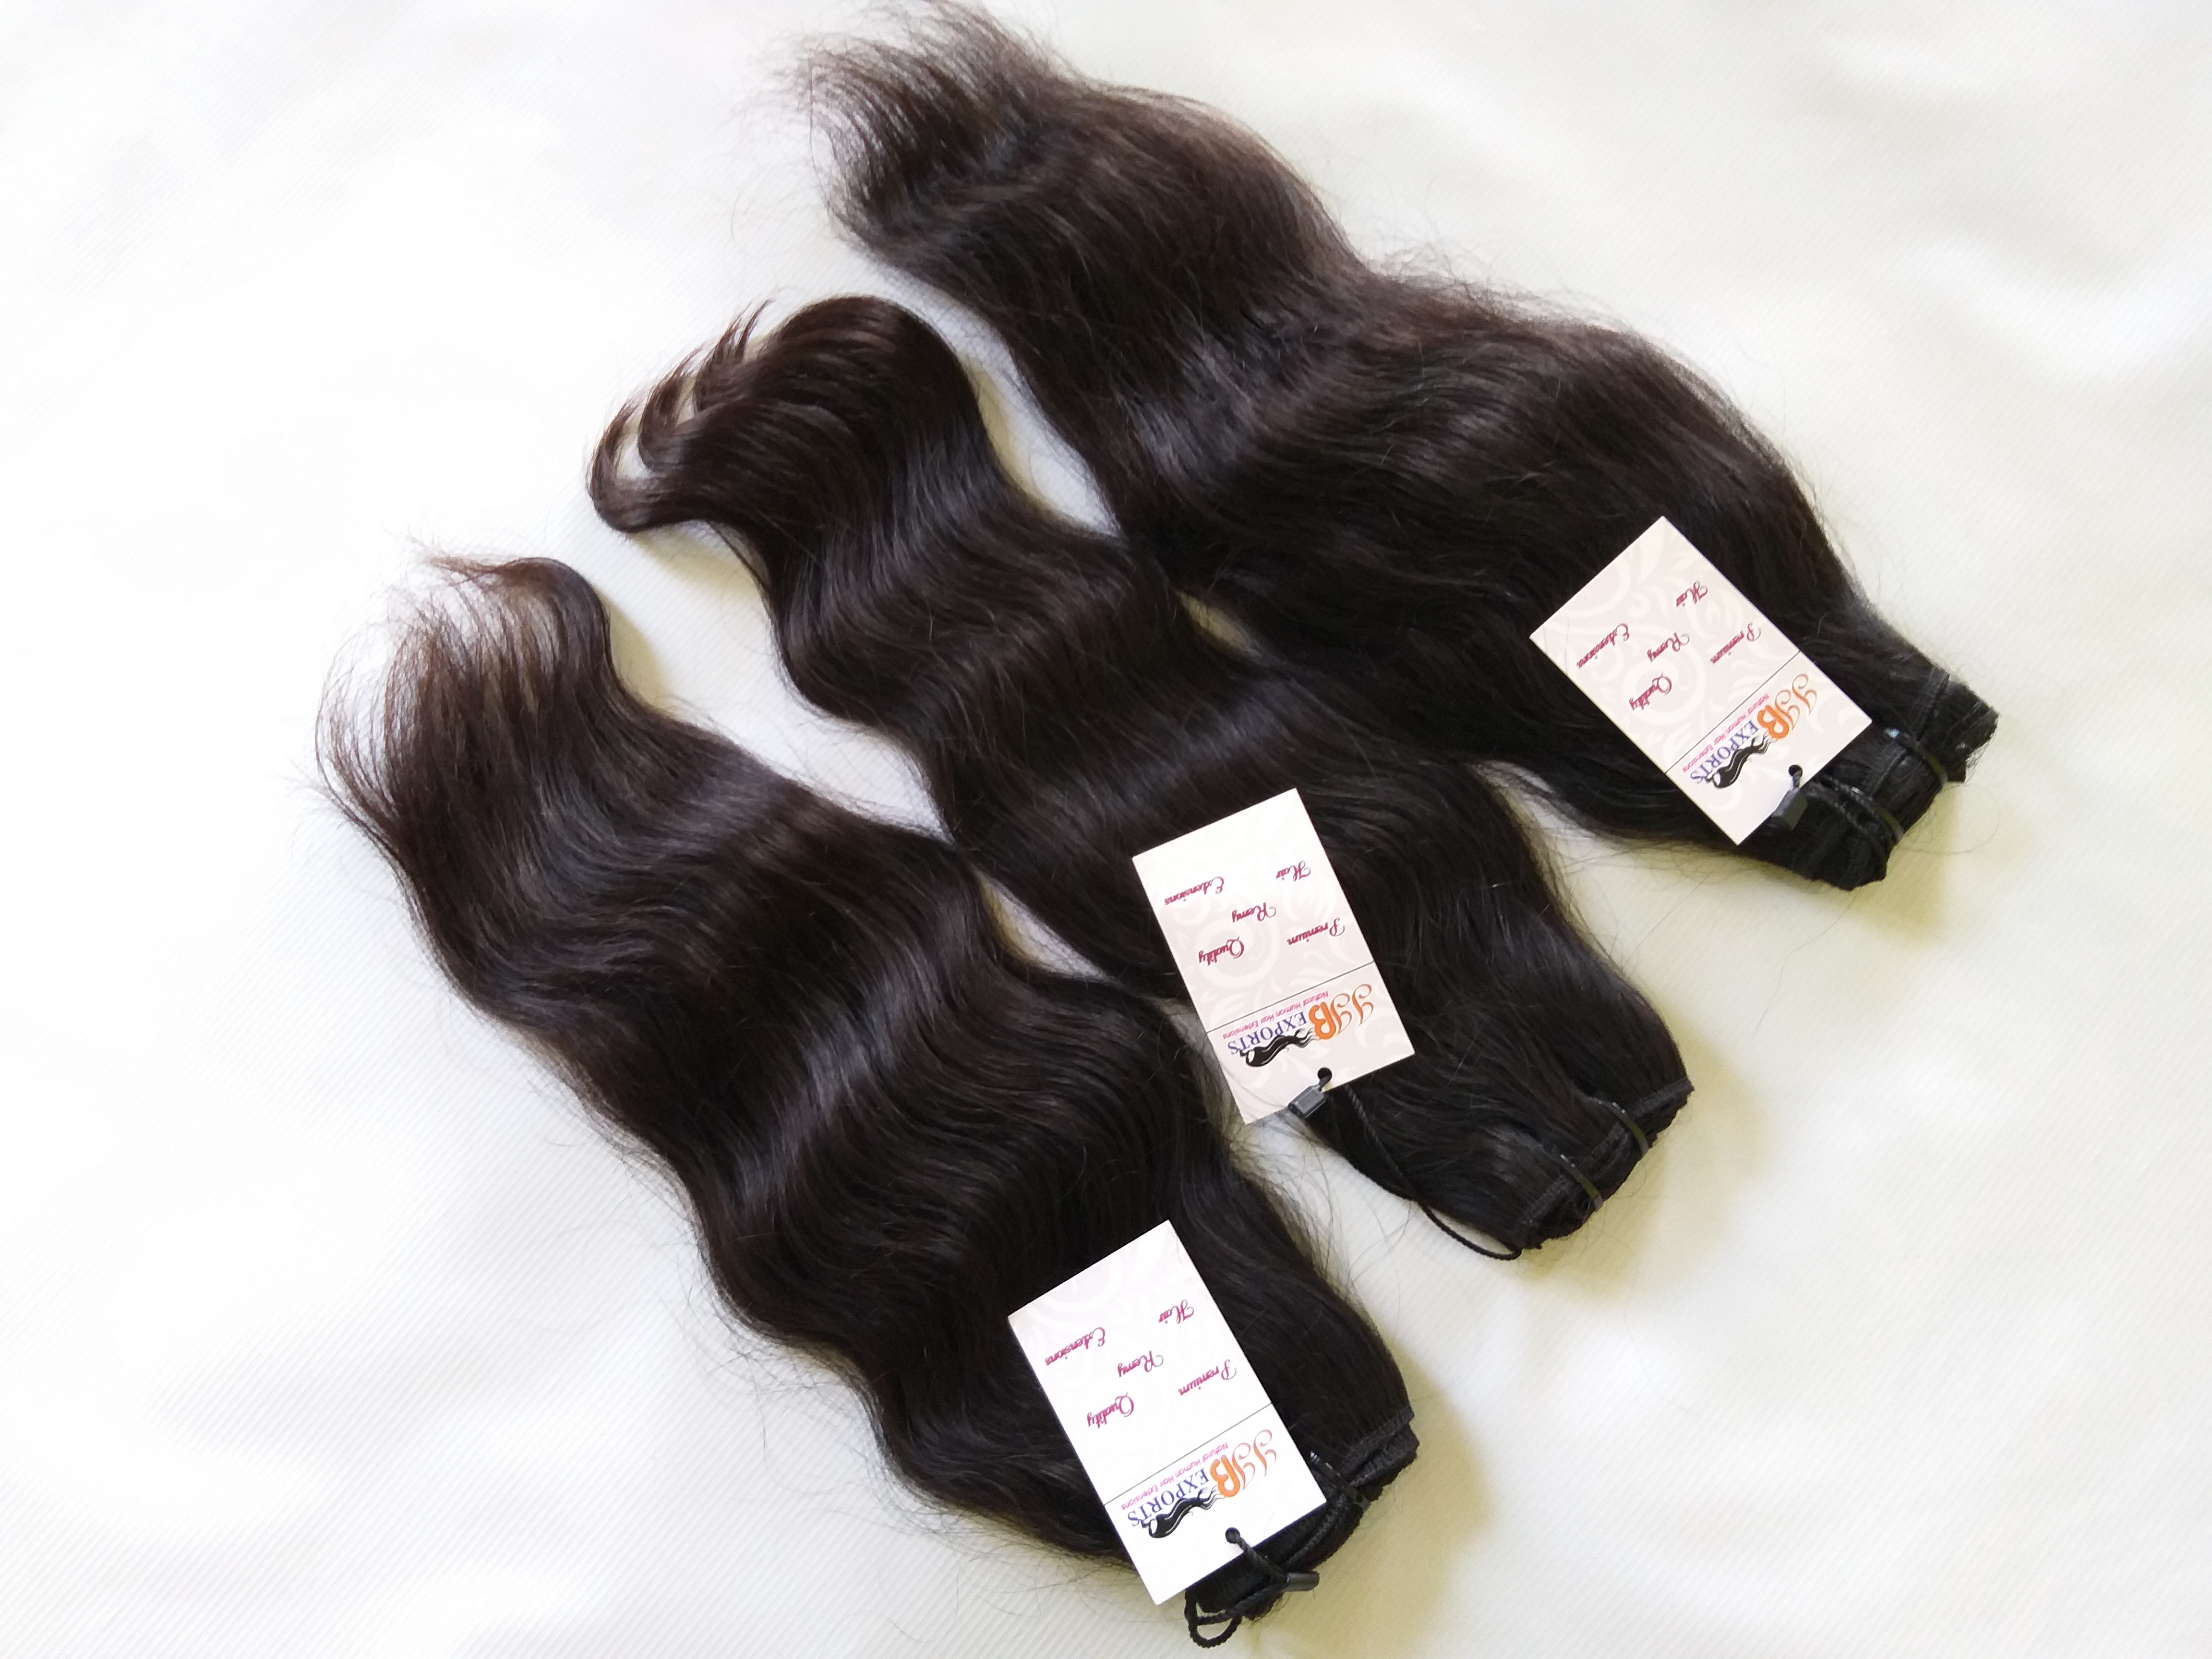 Natural Remy Indian Virgin Human Straight Wavy Curly Bulk Hair Supplier Wholesale